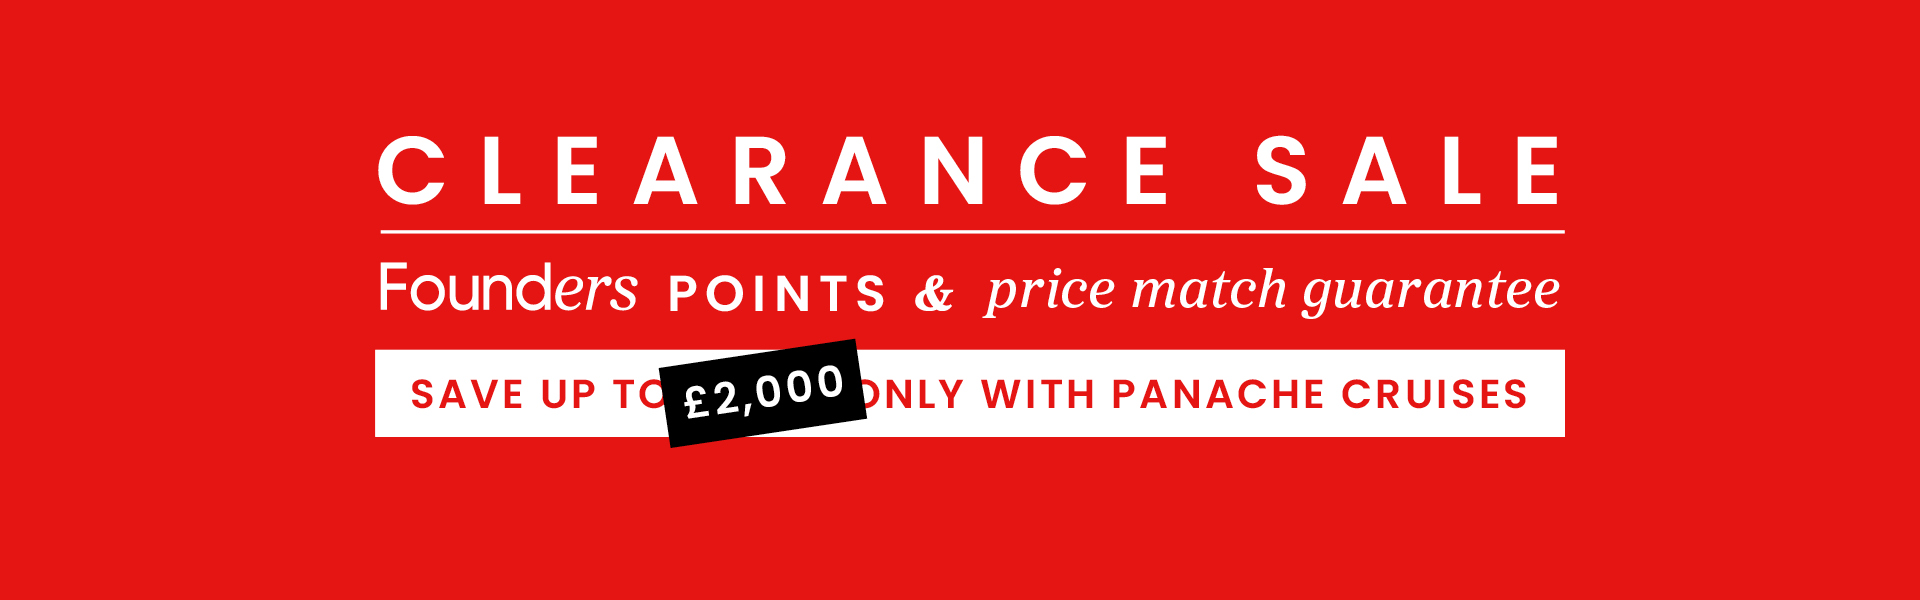 Panache Cruises Clearance Sale - Save up to an Additional £2,000